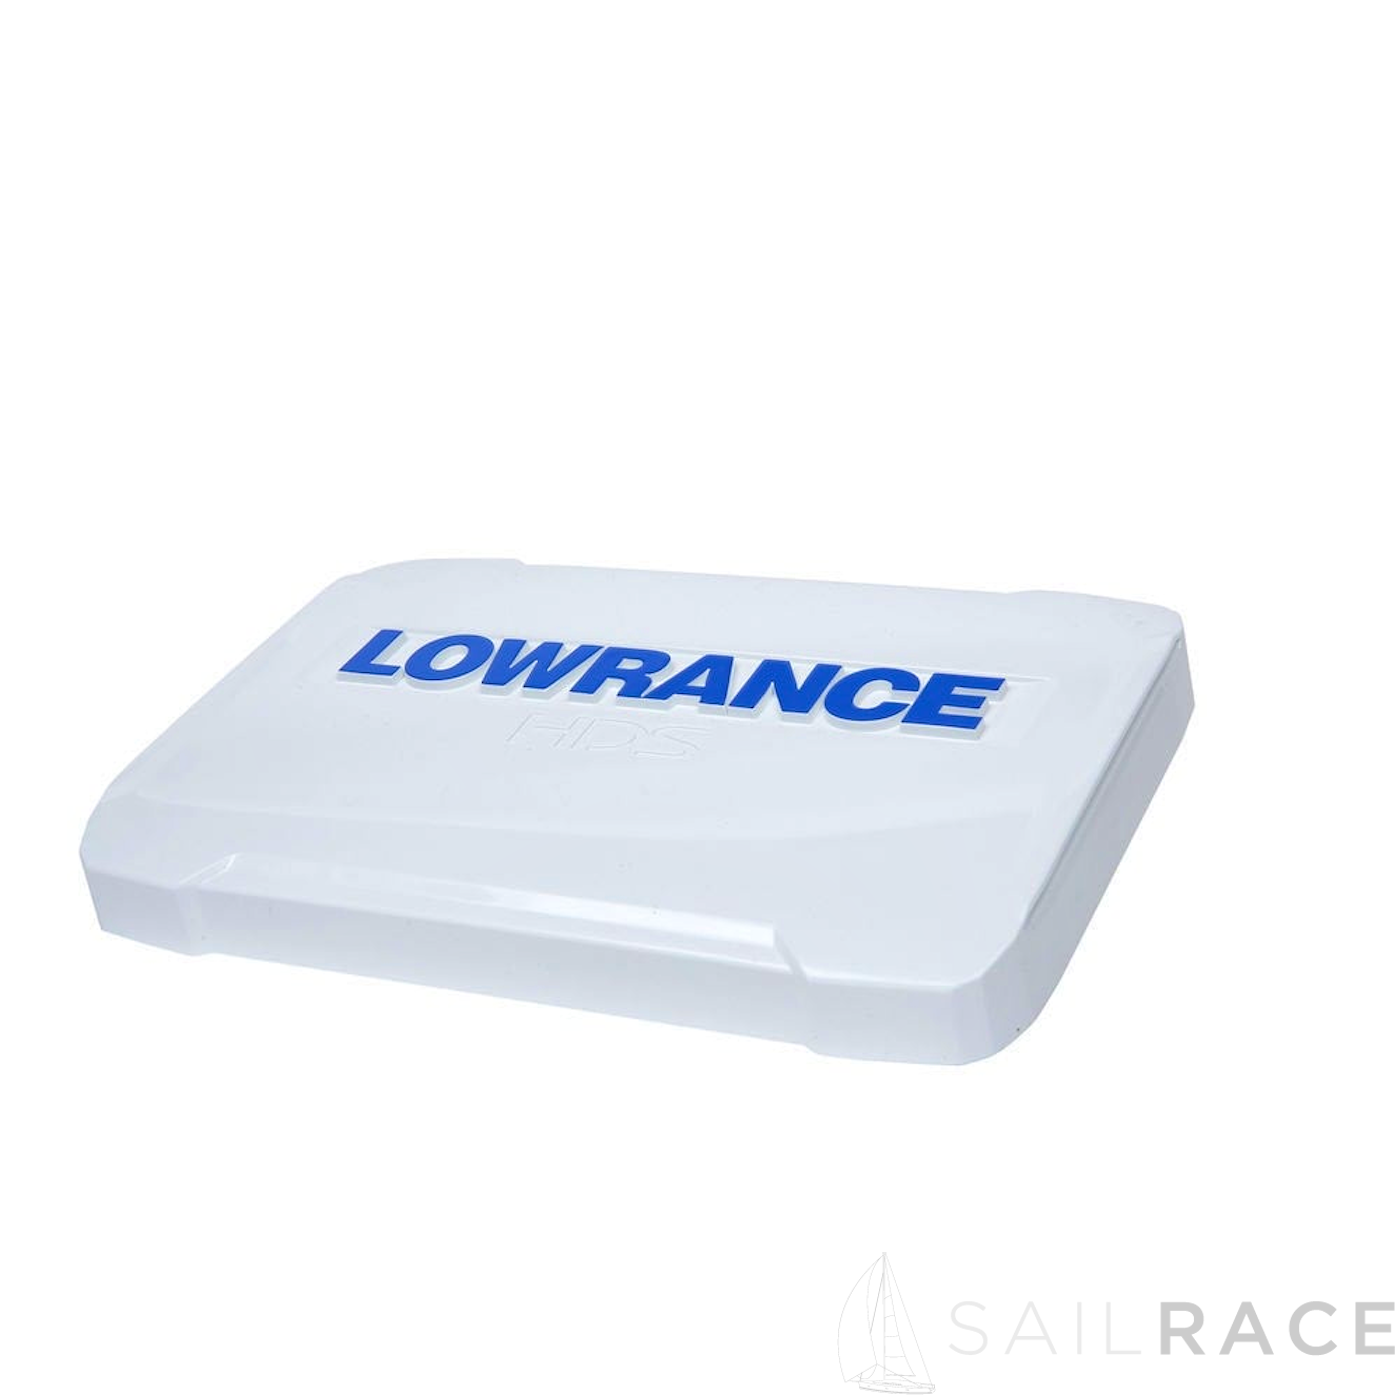 Lowrance HDS-7 GEN3 SUNCOVER - image 2